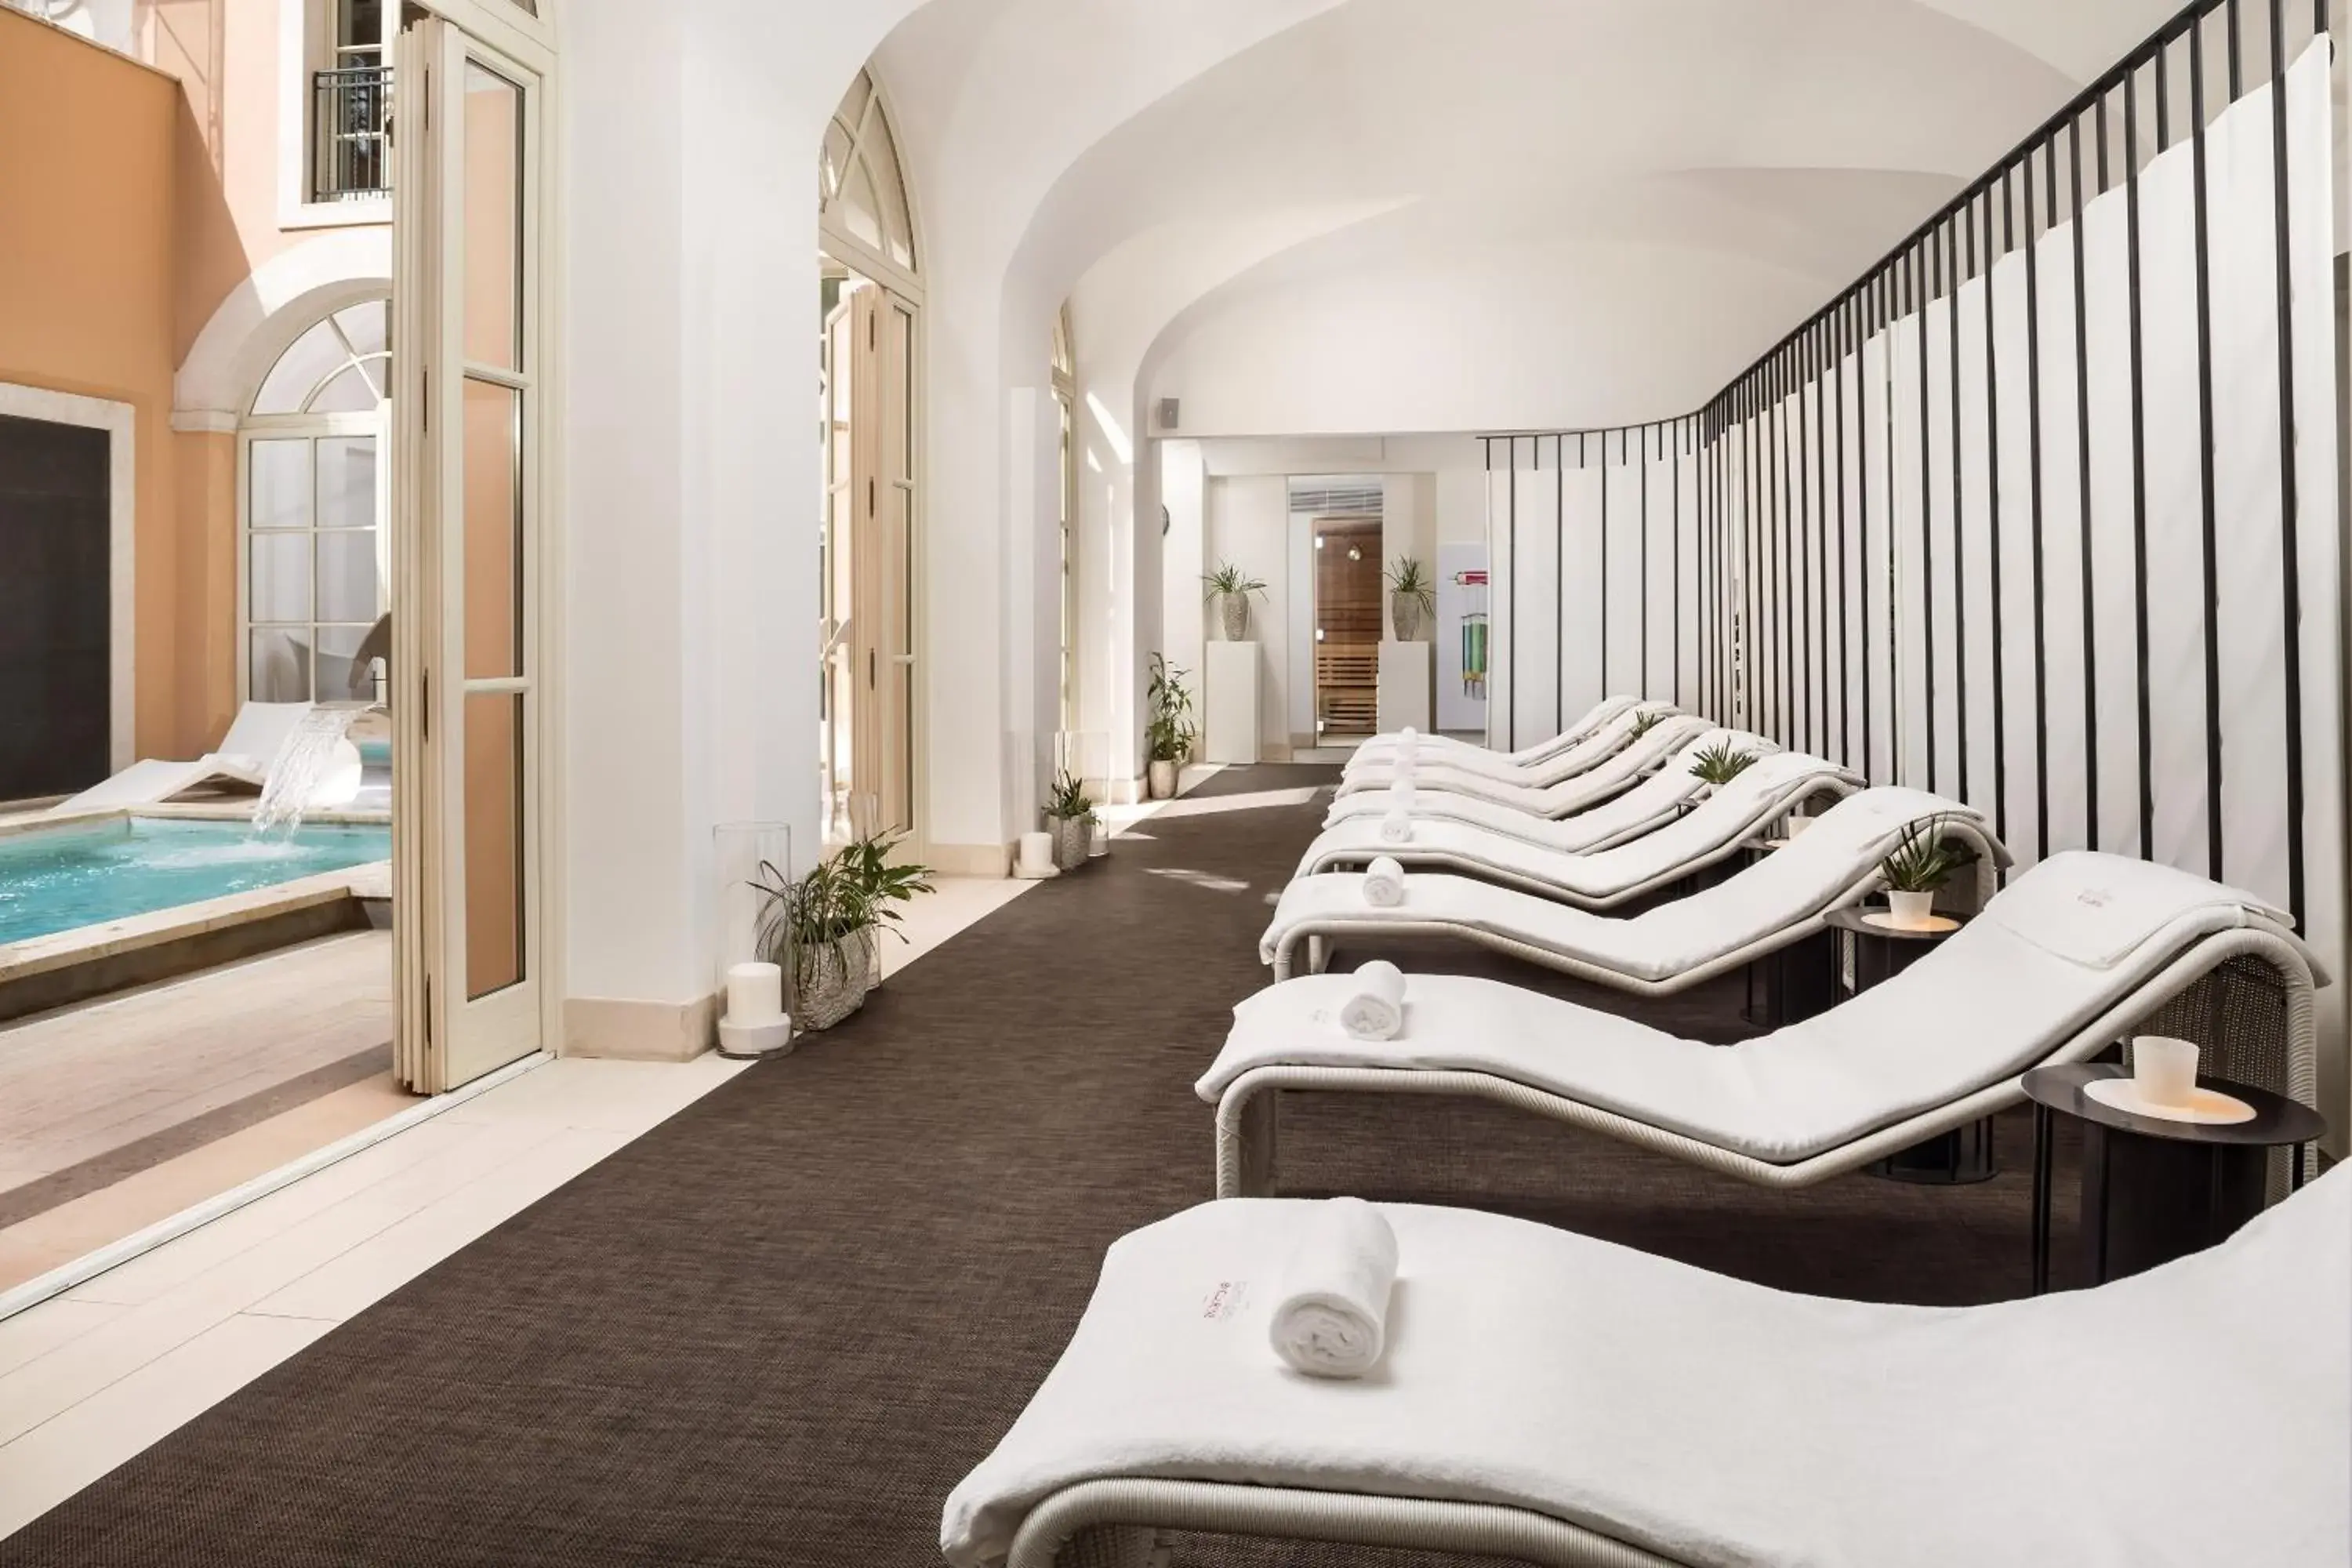 Spa and wellness centre/facilities, Spa/Wellness in Villa Agrippina Gran Meliá - The Leading Hotels of the World